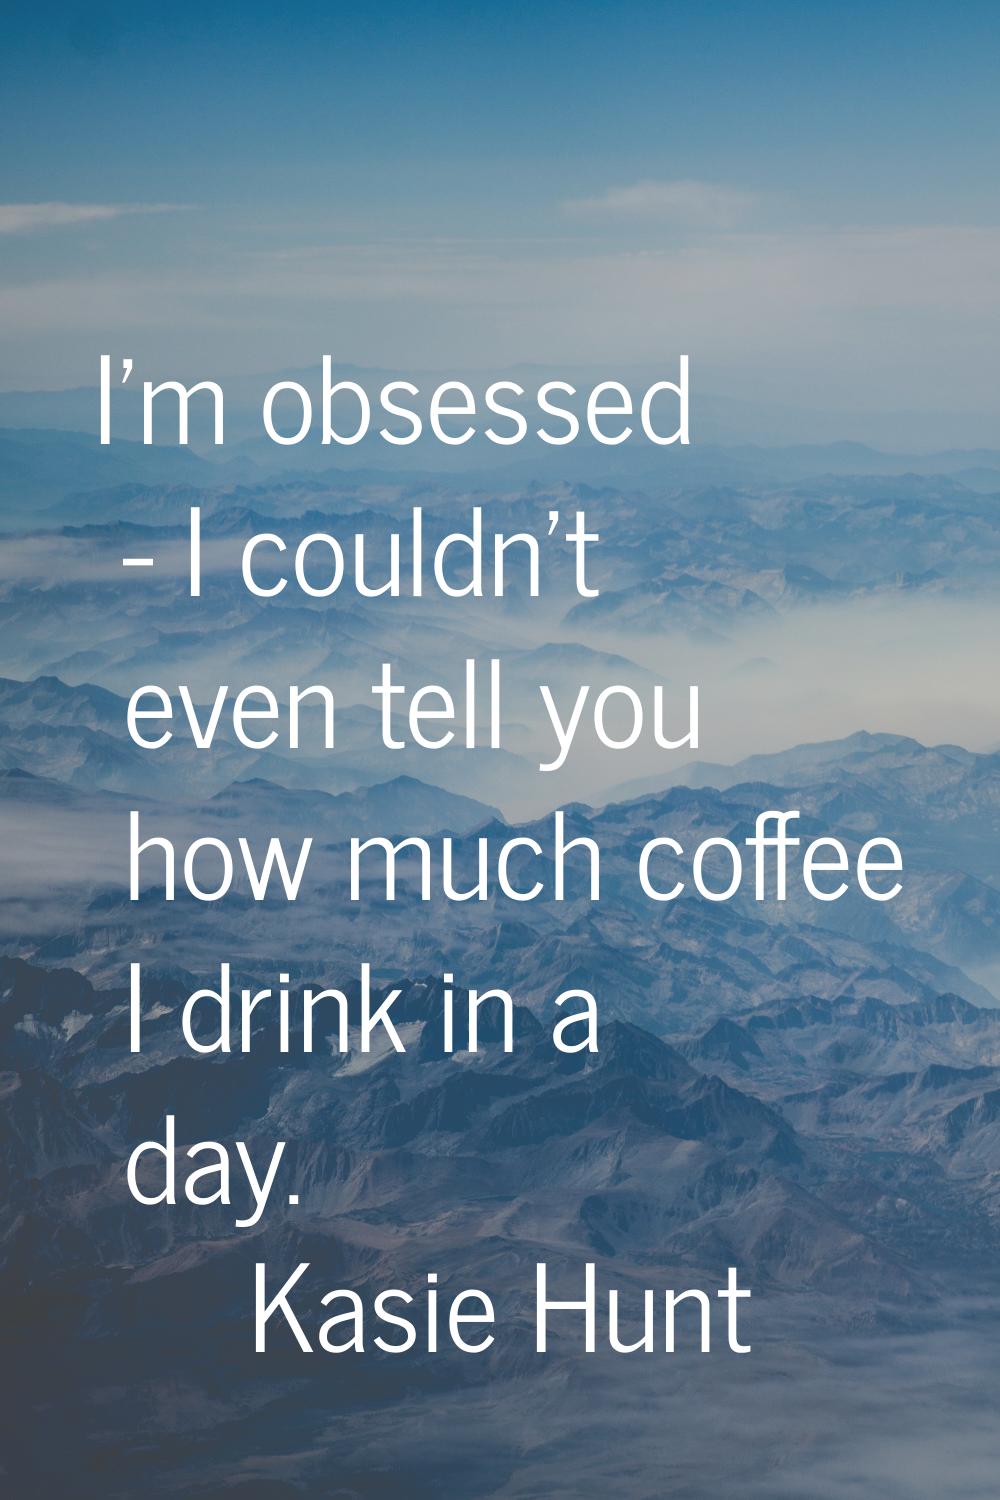 I'm obsessed - I couldn't even tell you how much coffee I drink in a day.